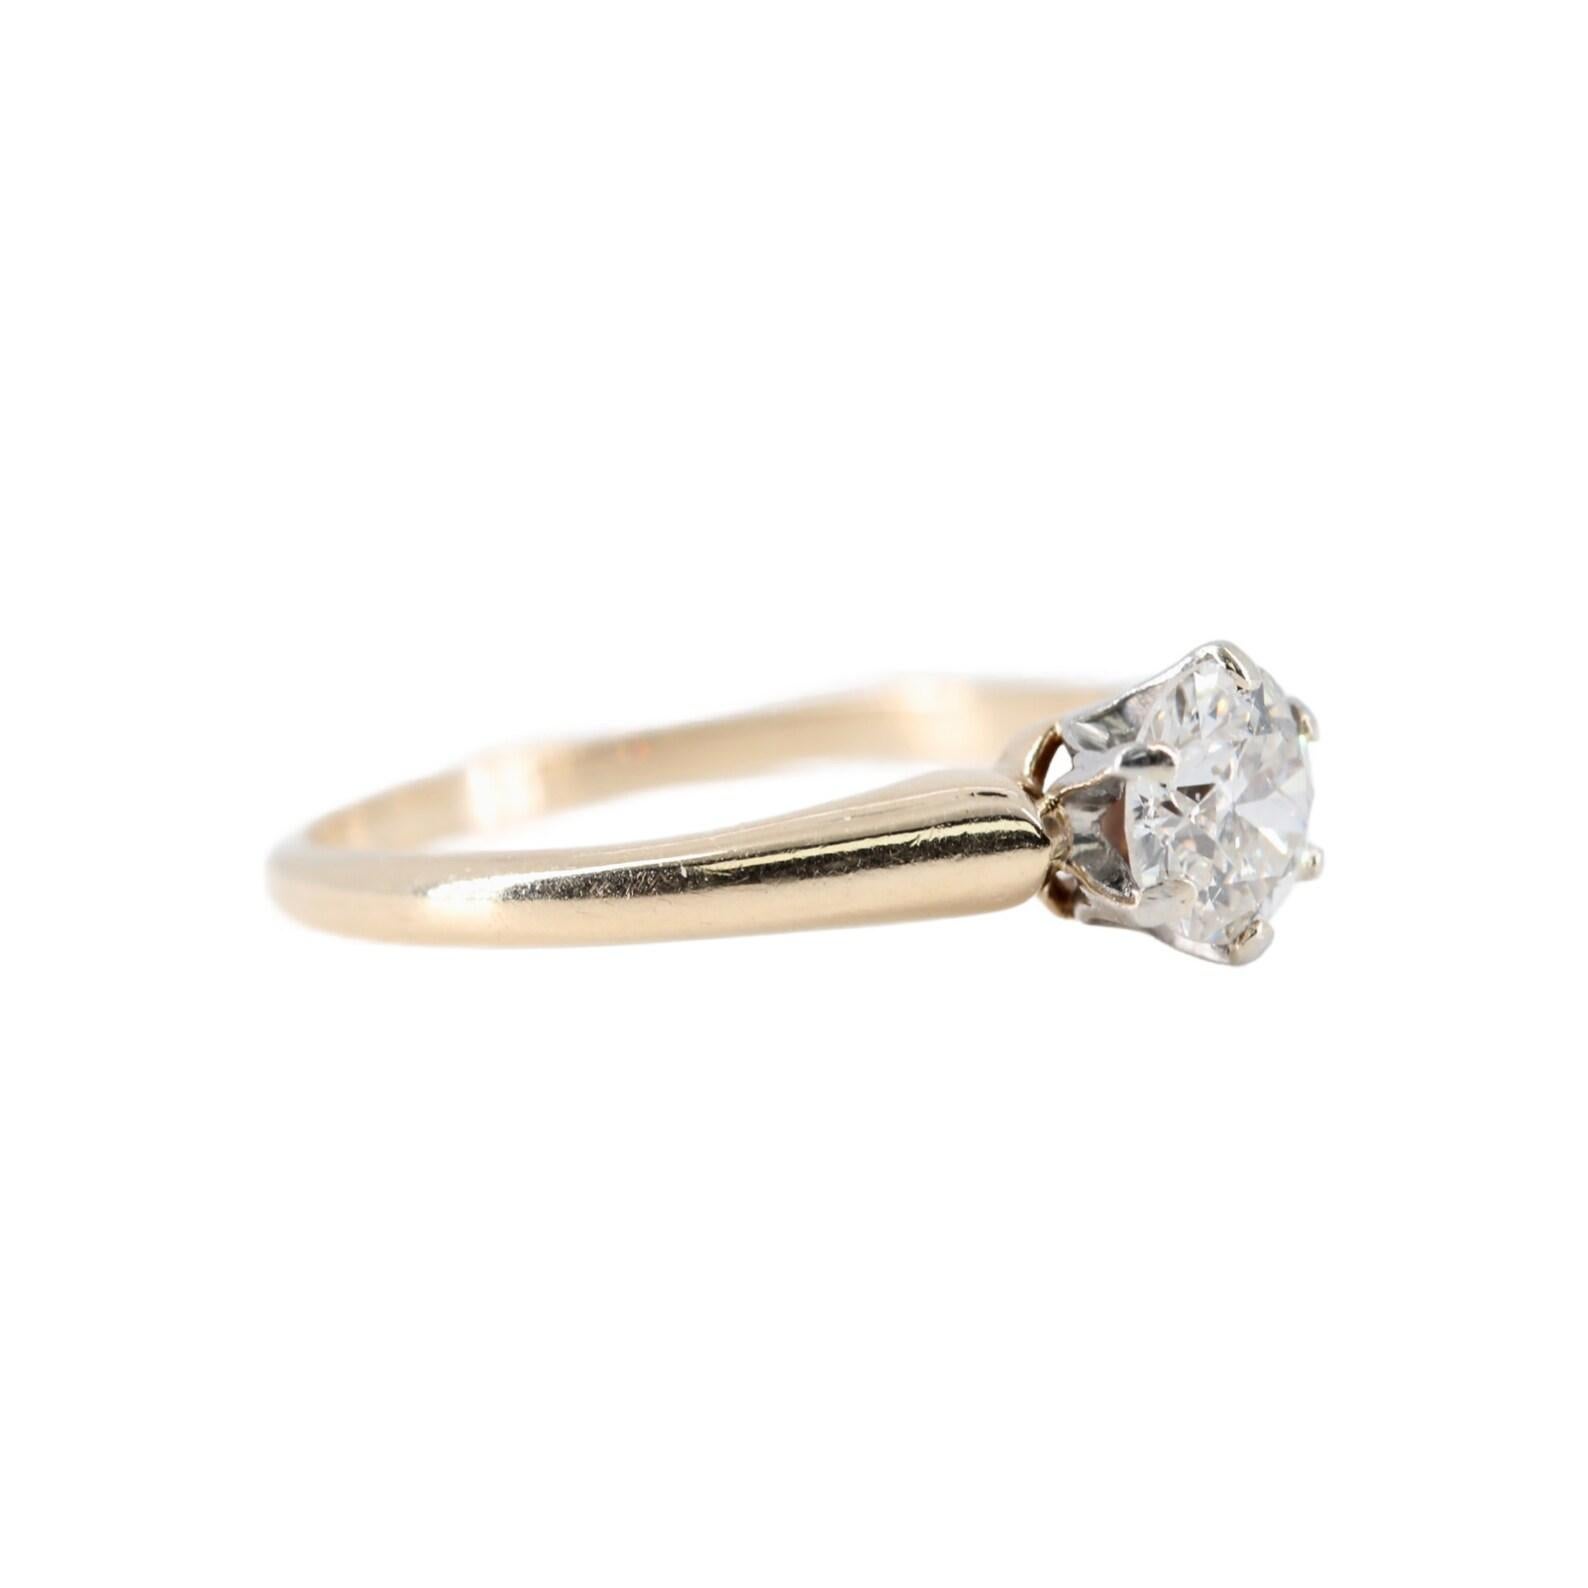 An Edwardian period old European cut diamond solitaire engagement ring. Centered by a 0.60 carat old European cut diamond of H color and SI2 clarity. Set in a platinum claw form head, with a shank of polished 14 karat yellow gold.

Hallmarked as 14